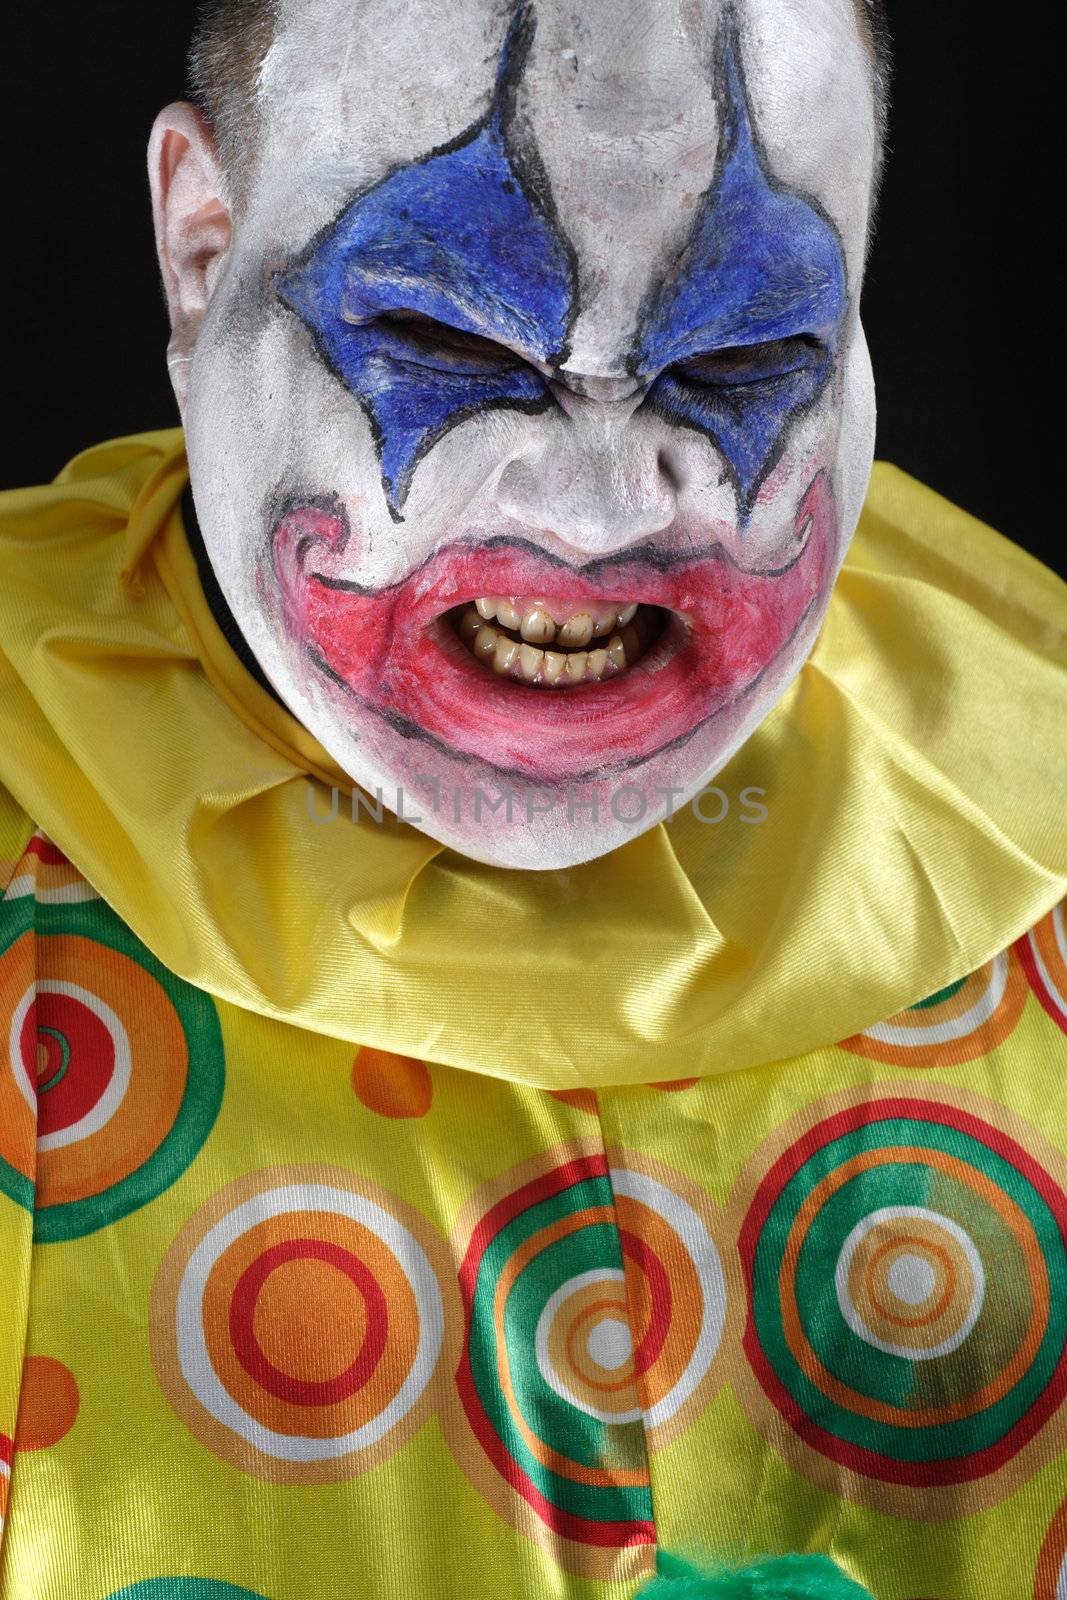 A nasty evil clown, angry and looking mean. Harsh lighting from below, focus on the teeth.
